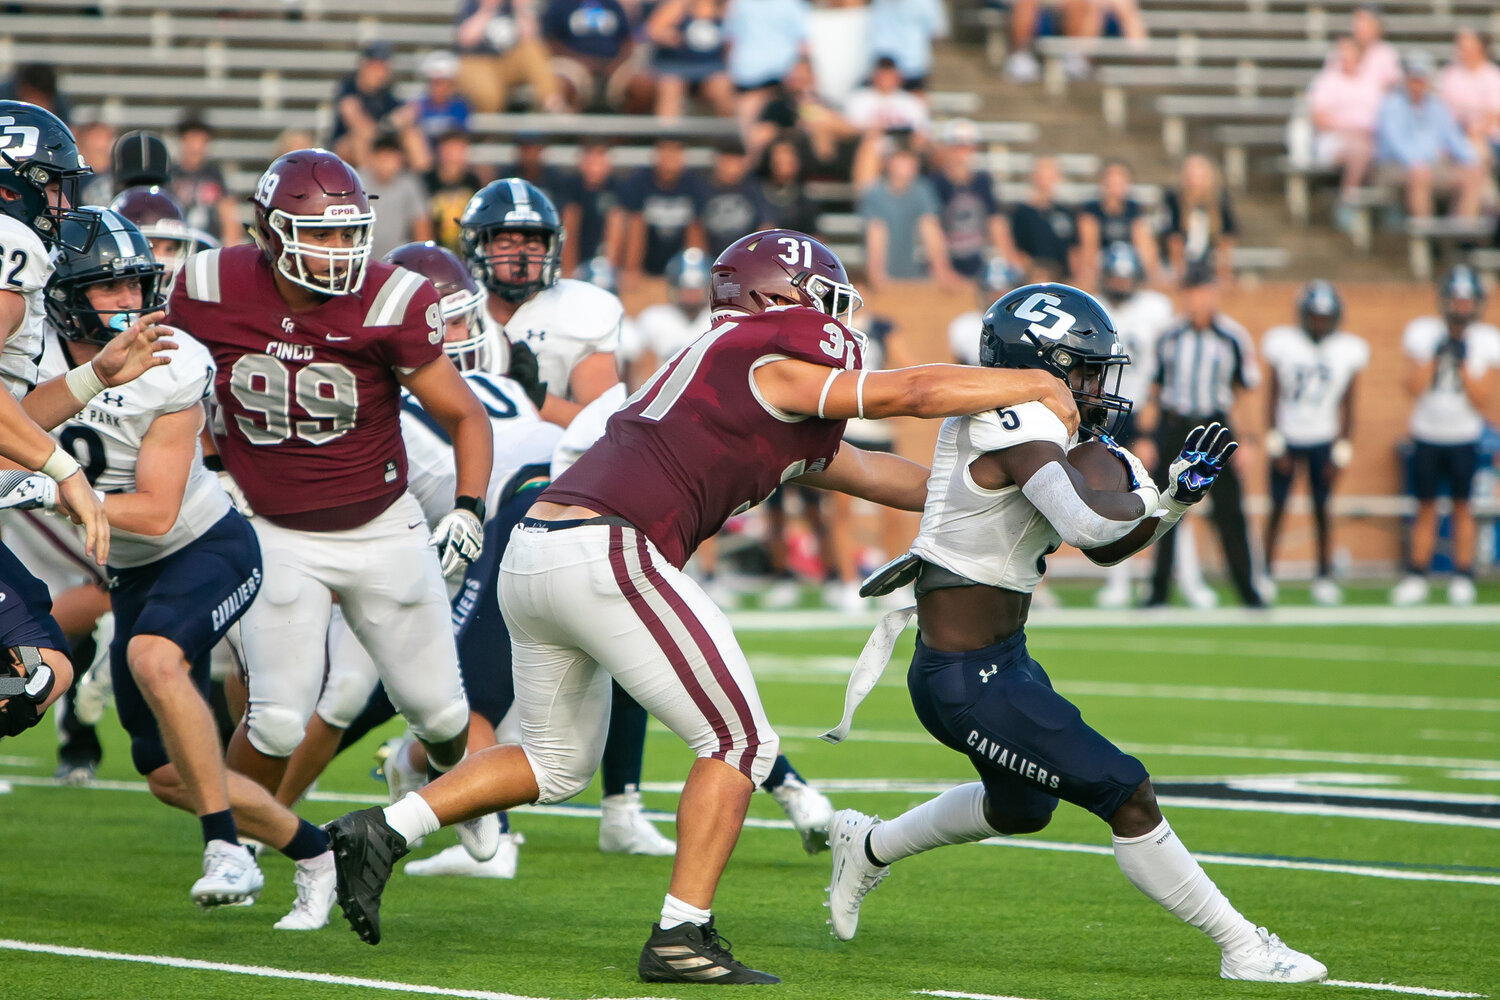 Ari Abel takes down College Park's Eugene Burnett during Friday's game between Cinco Ranch and College Park at Rhodes Stadium.